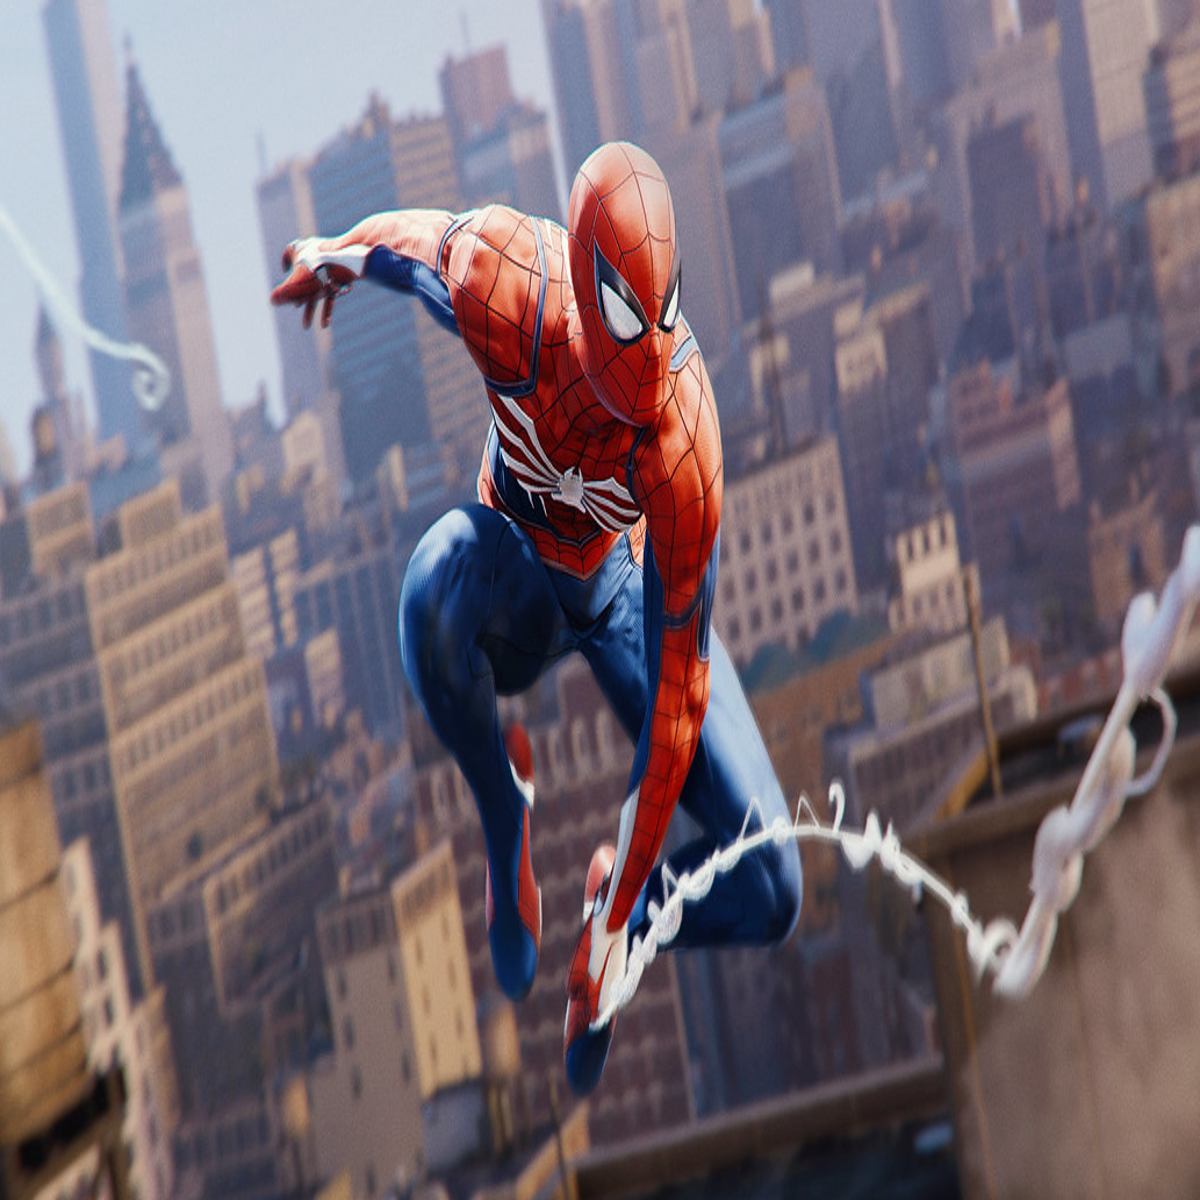 Spider-Man Remastered on PC adds option to link PSN account